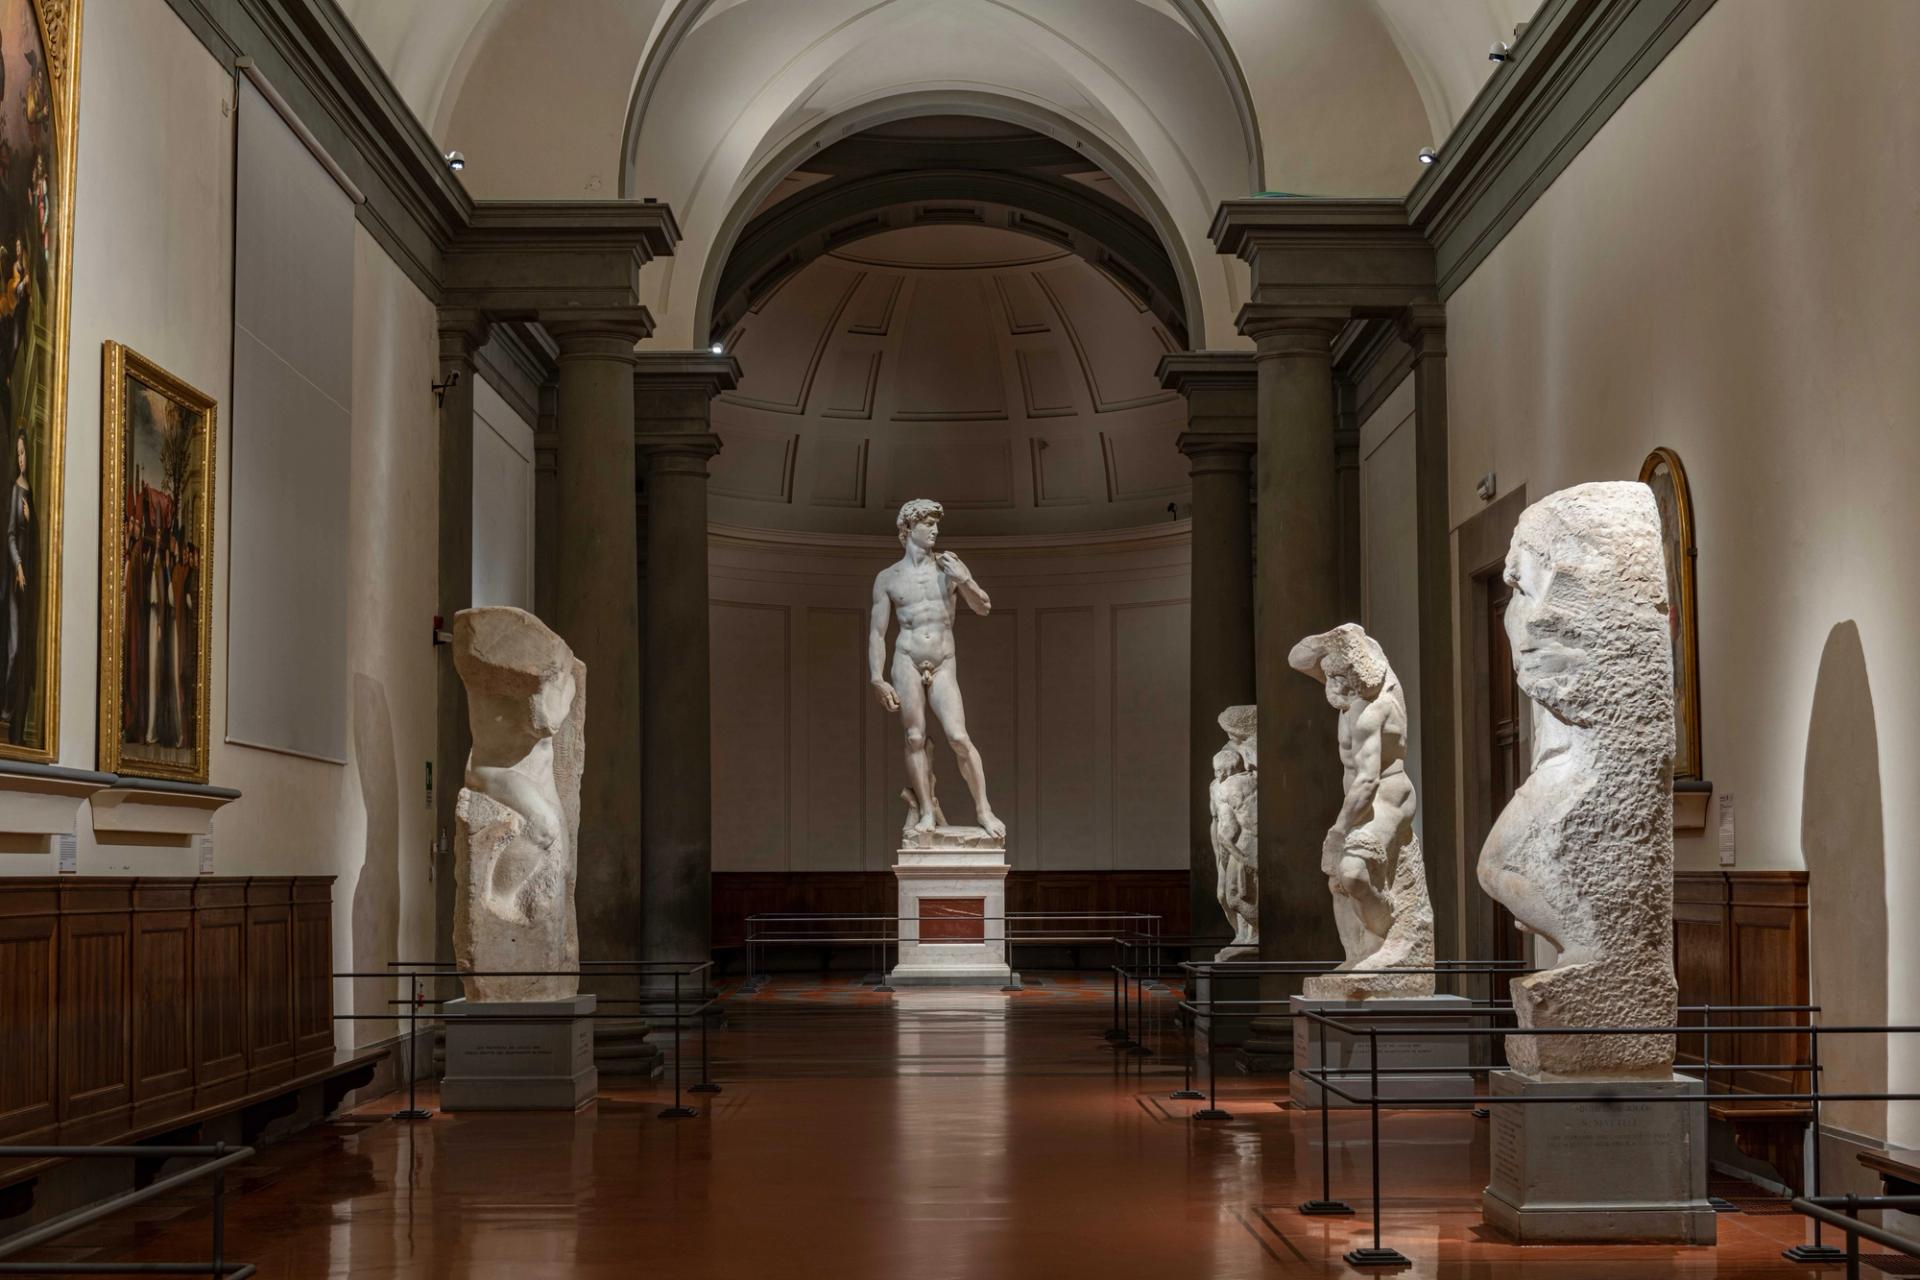 Michelangelo's David has received a new lighting system as part of a two-year renovation at the Galleria dell'Accademia in Florence. Photo: Guido Cozzi